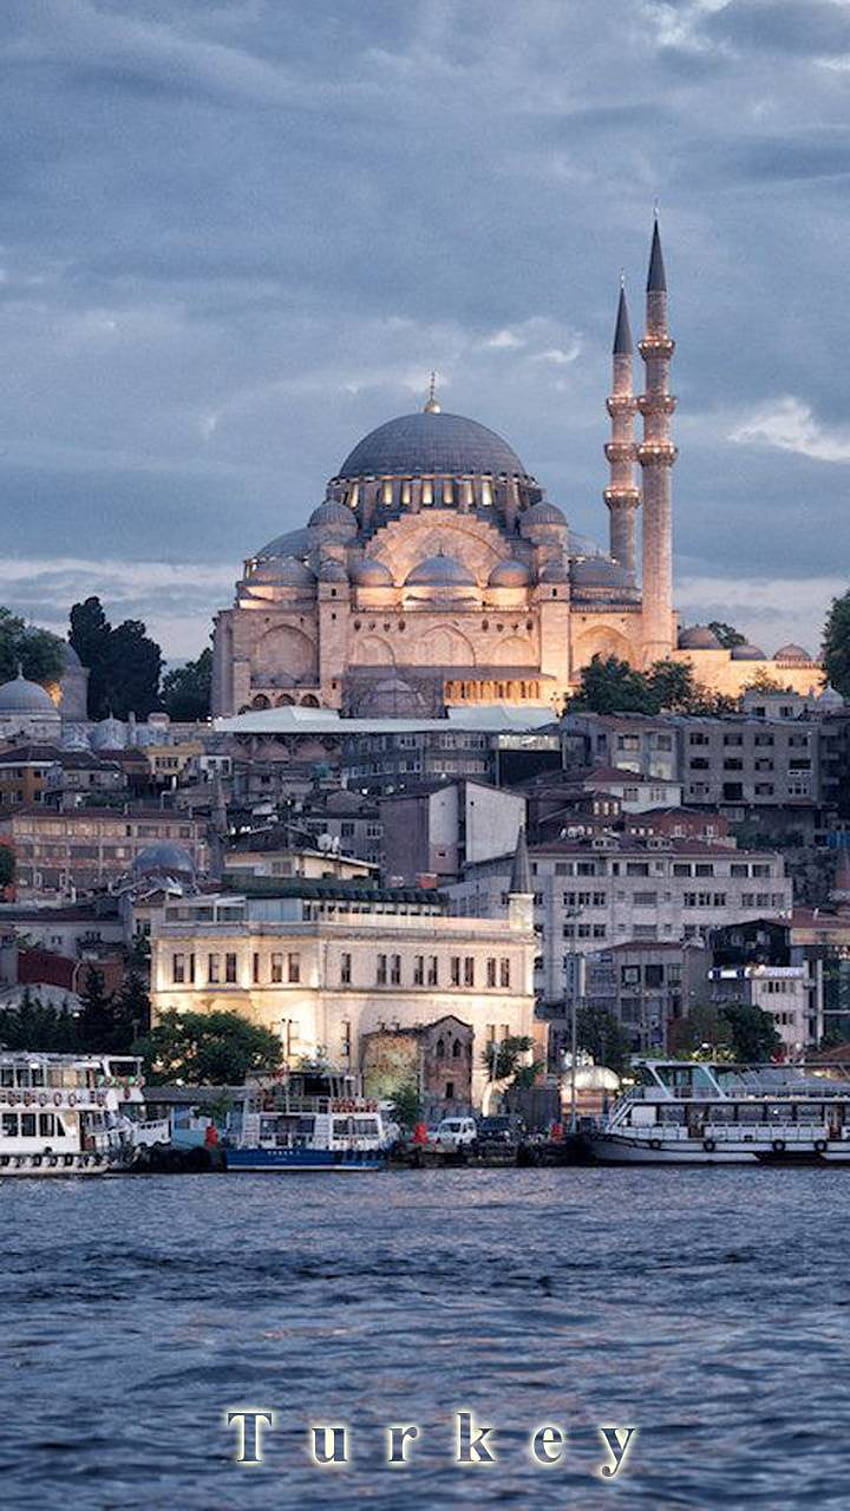 Turkey posted by Ethan Anderson, istanbul city iphone HD phone wallpaper